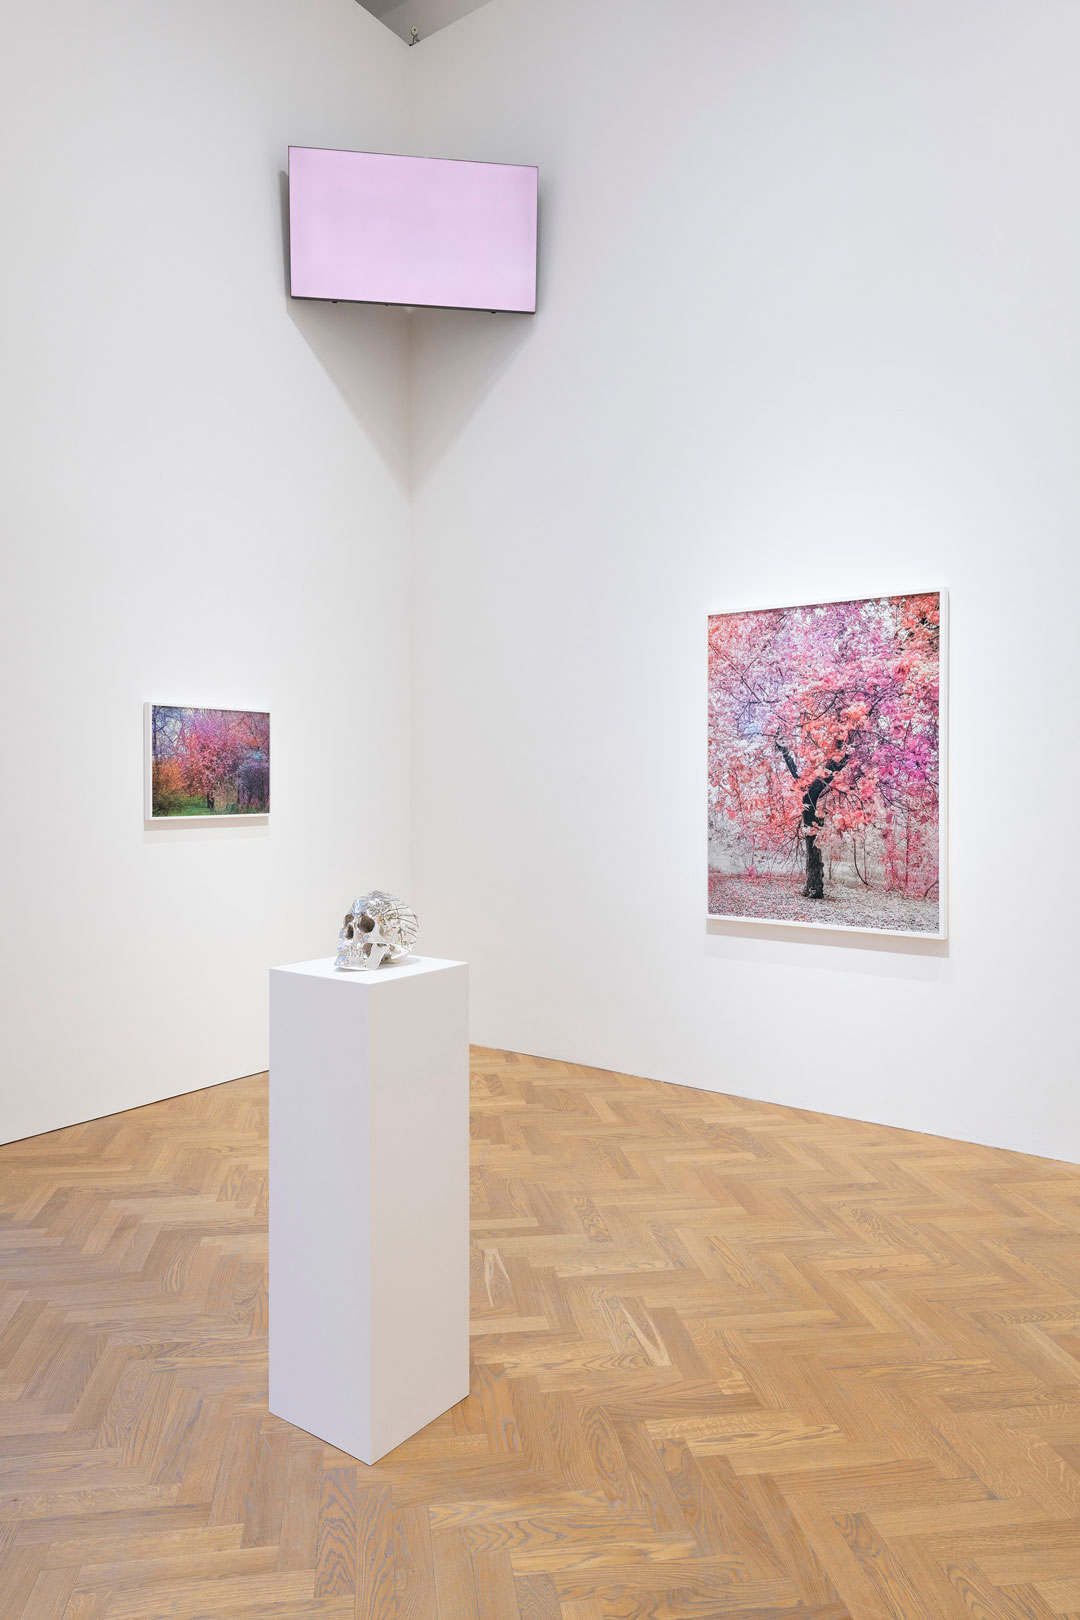 Installation view of Bloom, Trevor Paglen's new exhibition at Pace in London,